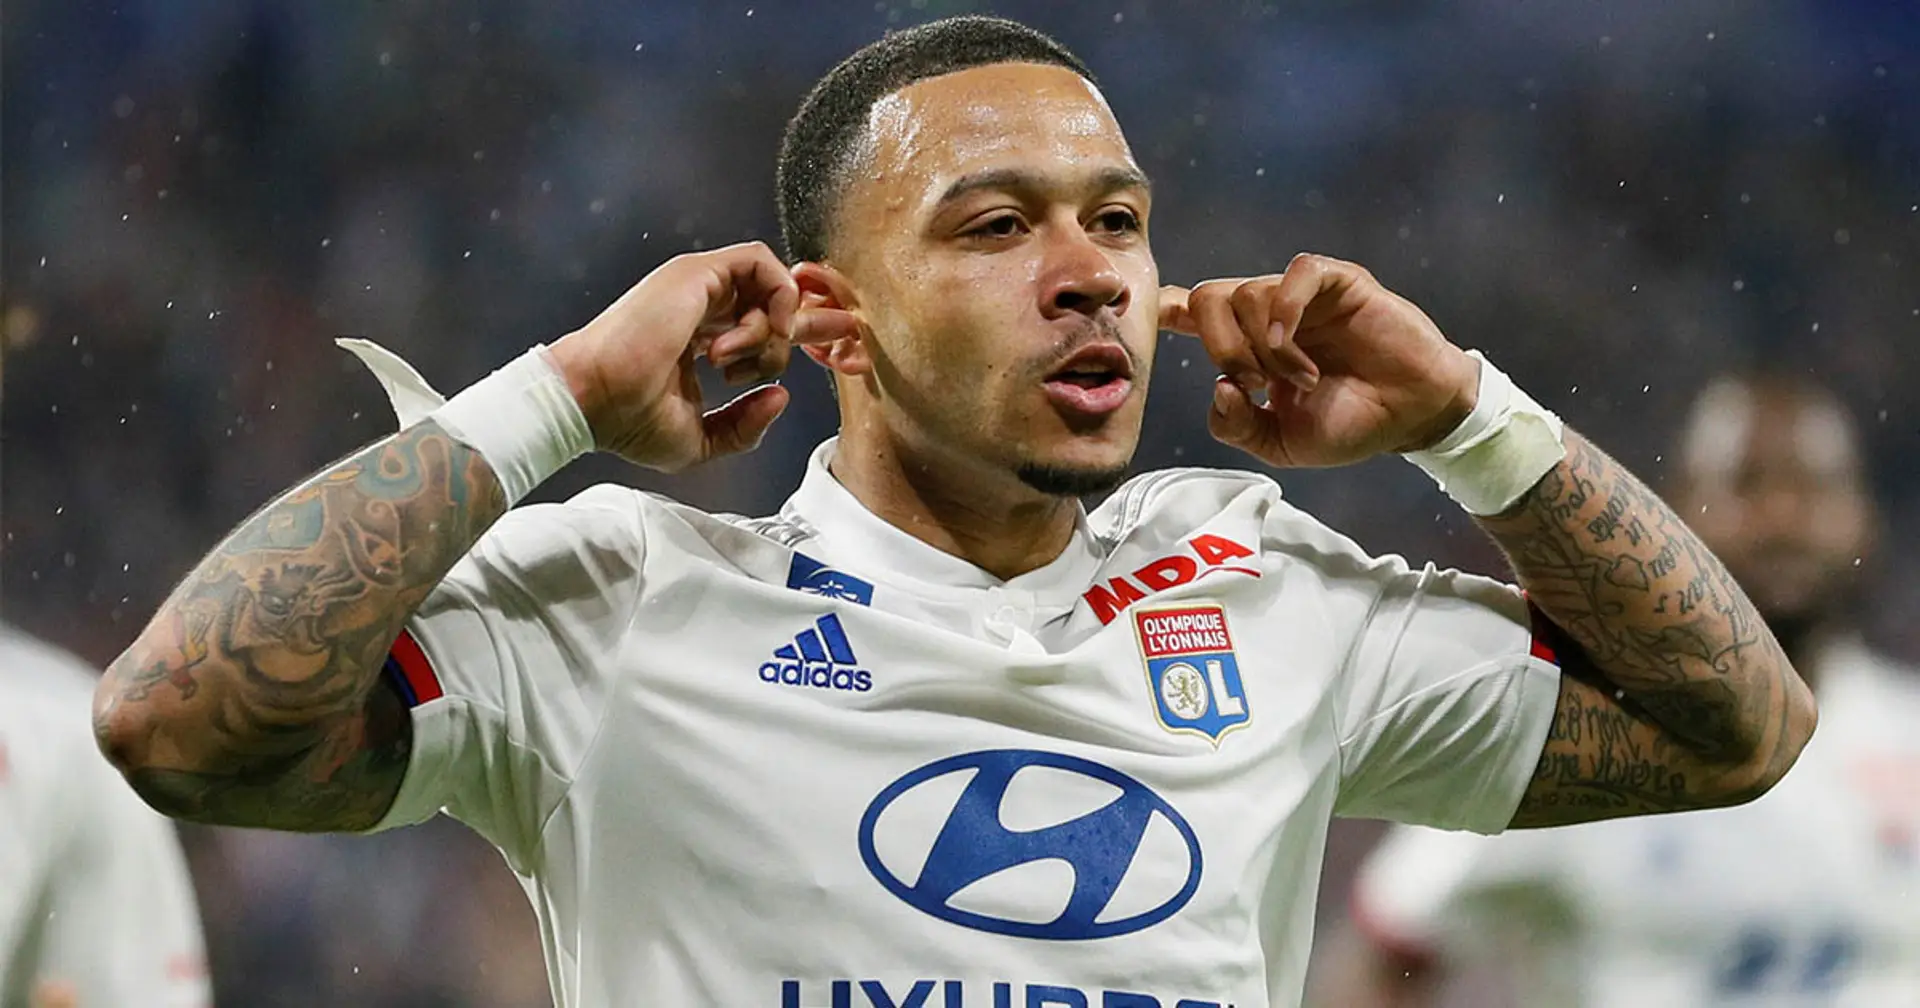 Ticket to Barca booked? Memphis Depay benched for Lyon game despite being injury-free